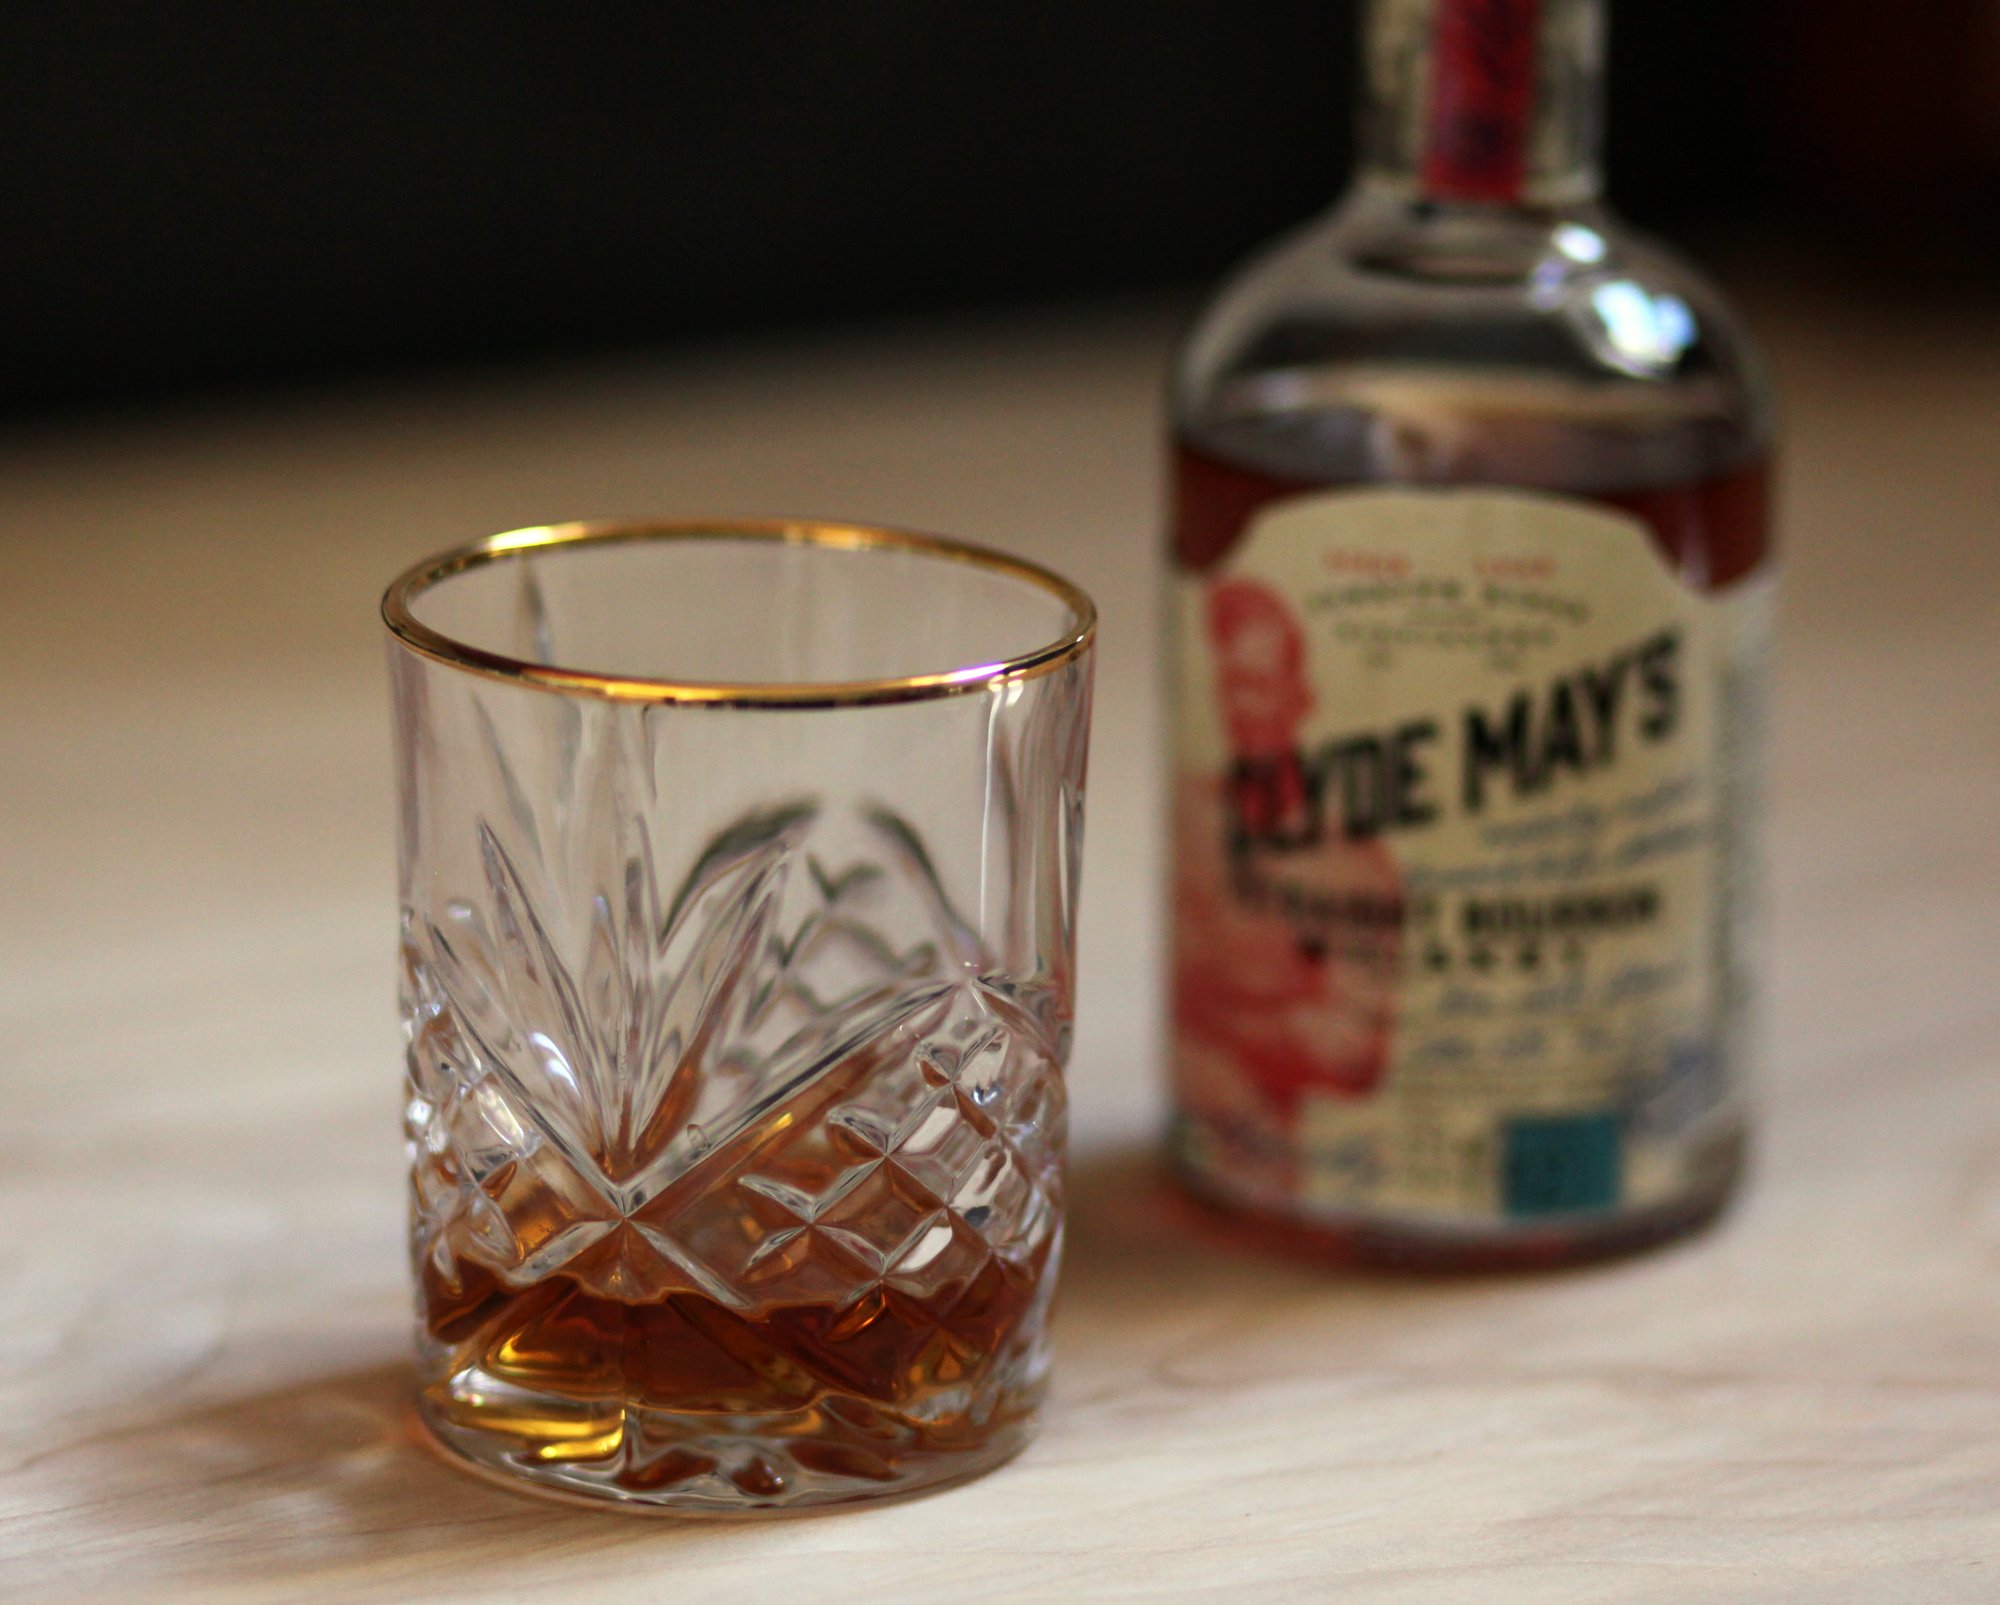 Clyde Mays Straight Bourbon Review with Glass